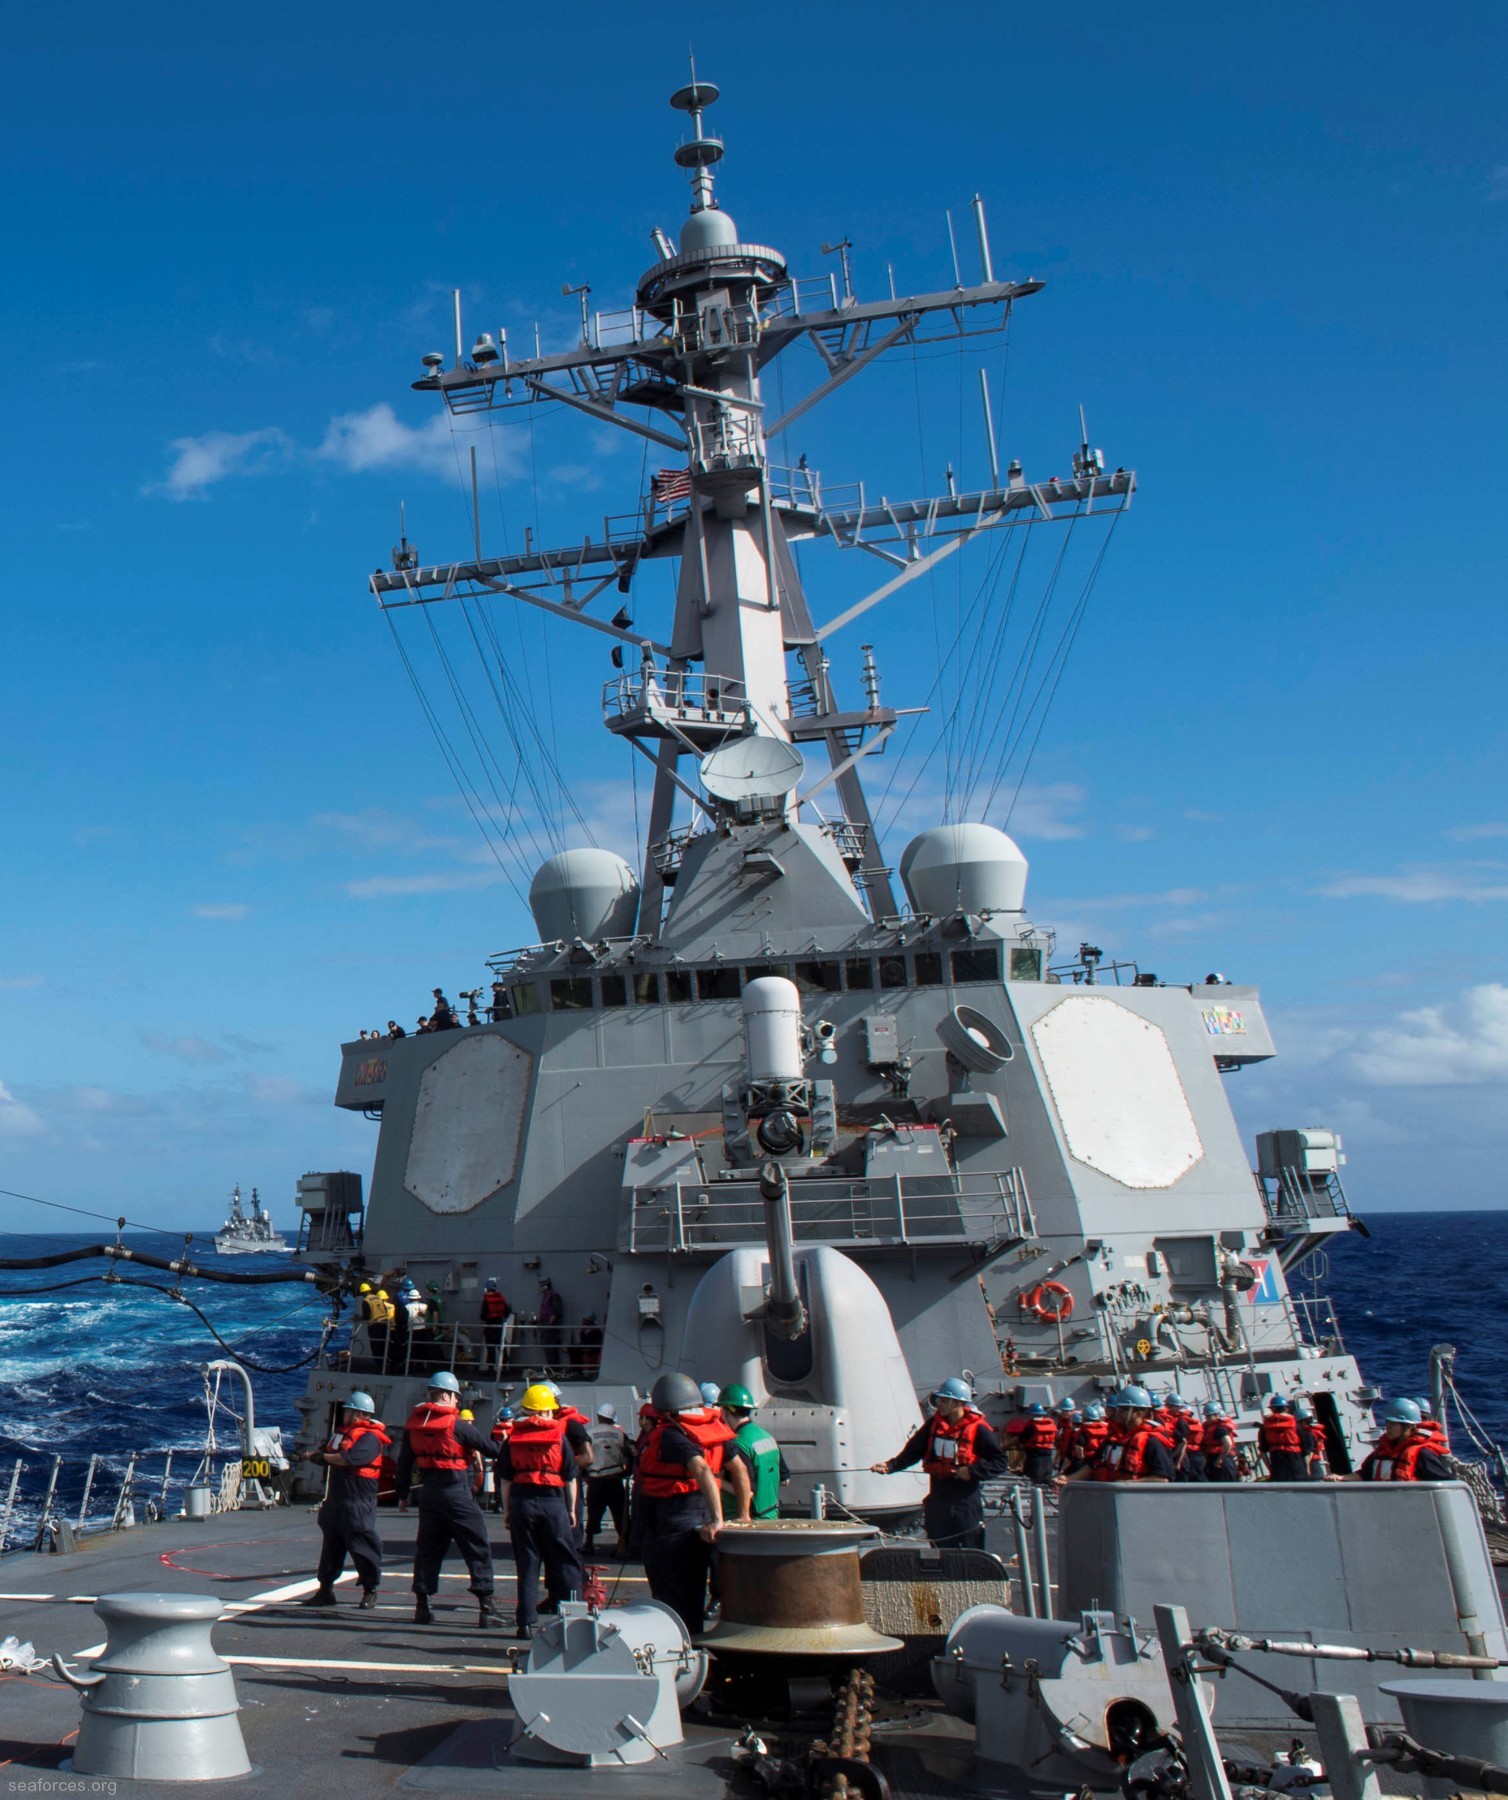 ddg-62 uss fitzgerald guided missile destroyer 2016 20 replenishment philippine sea